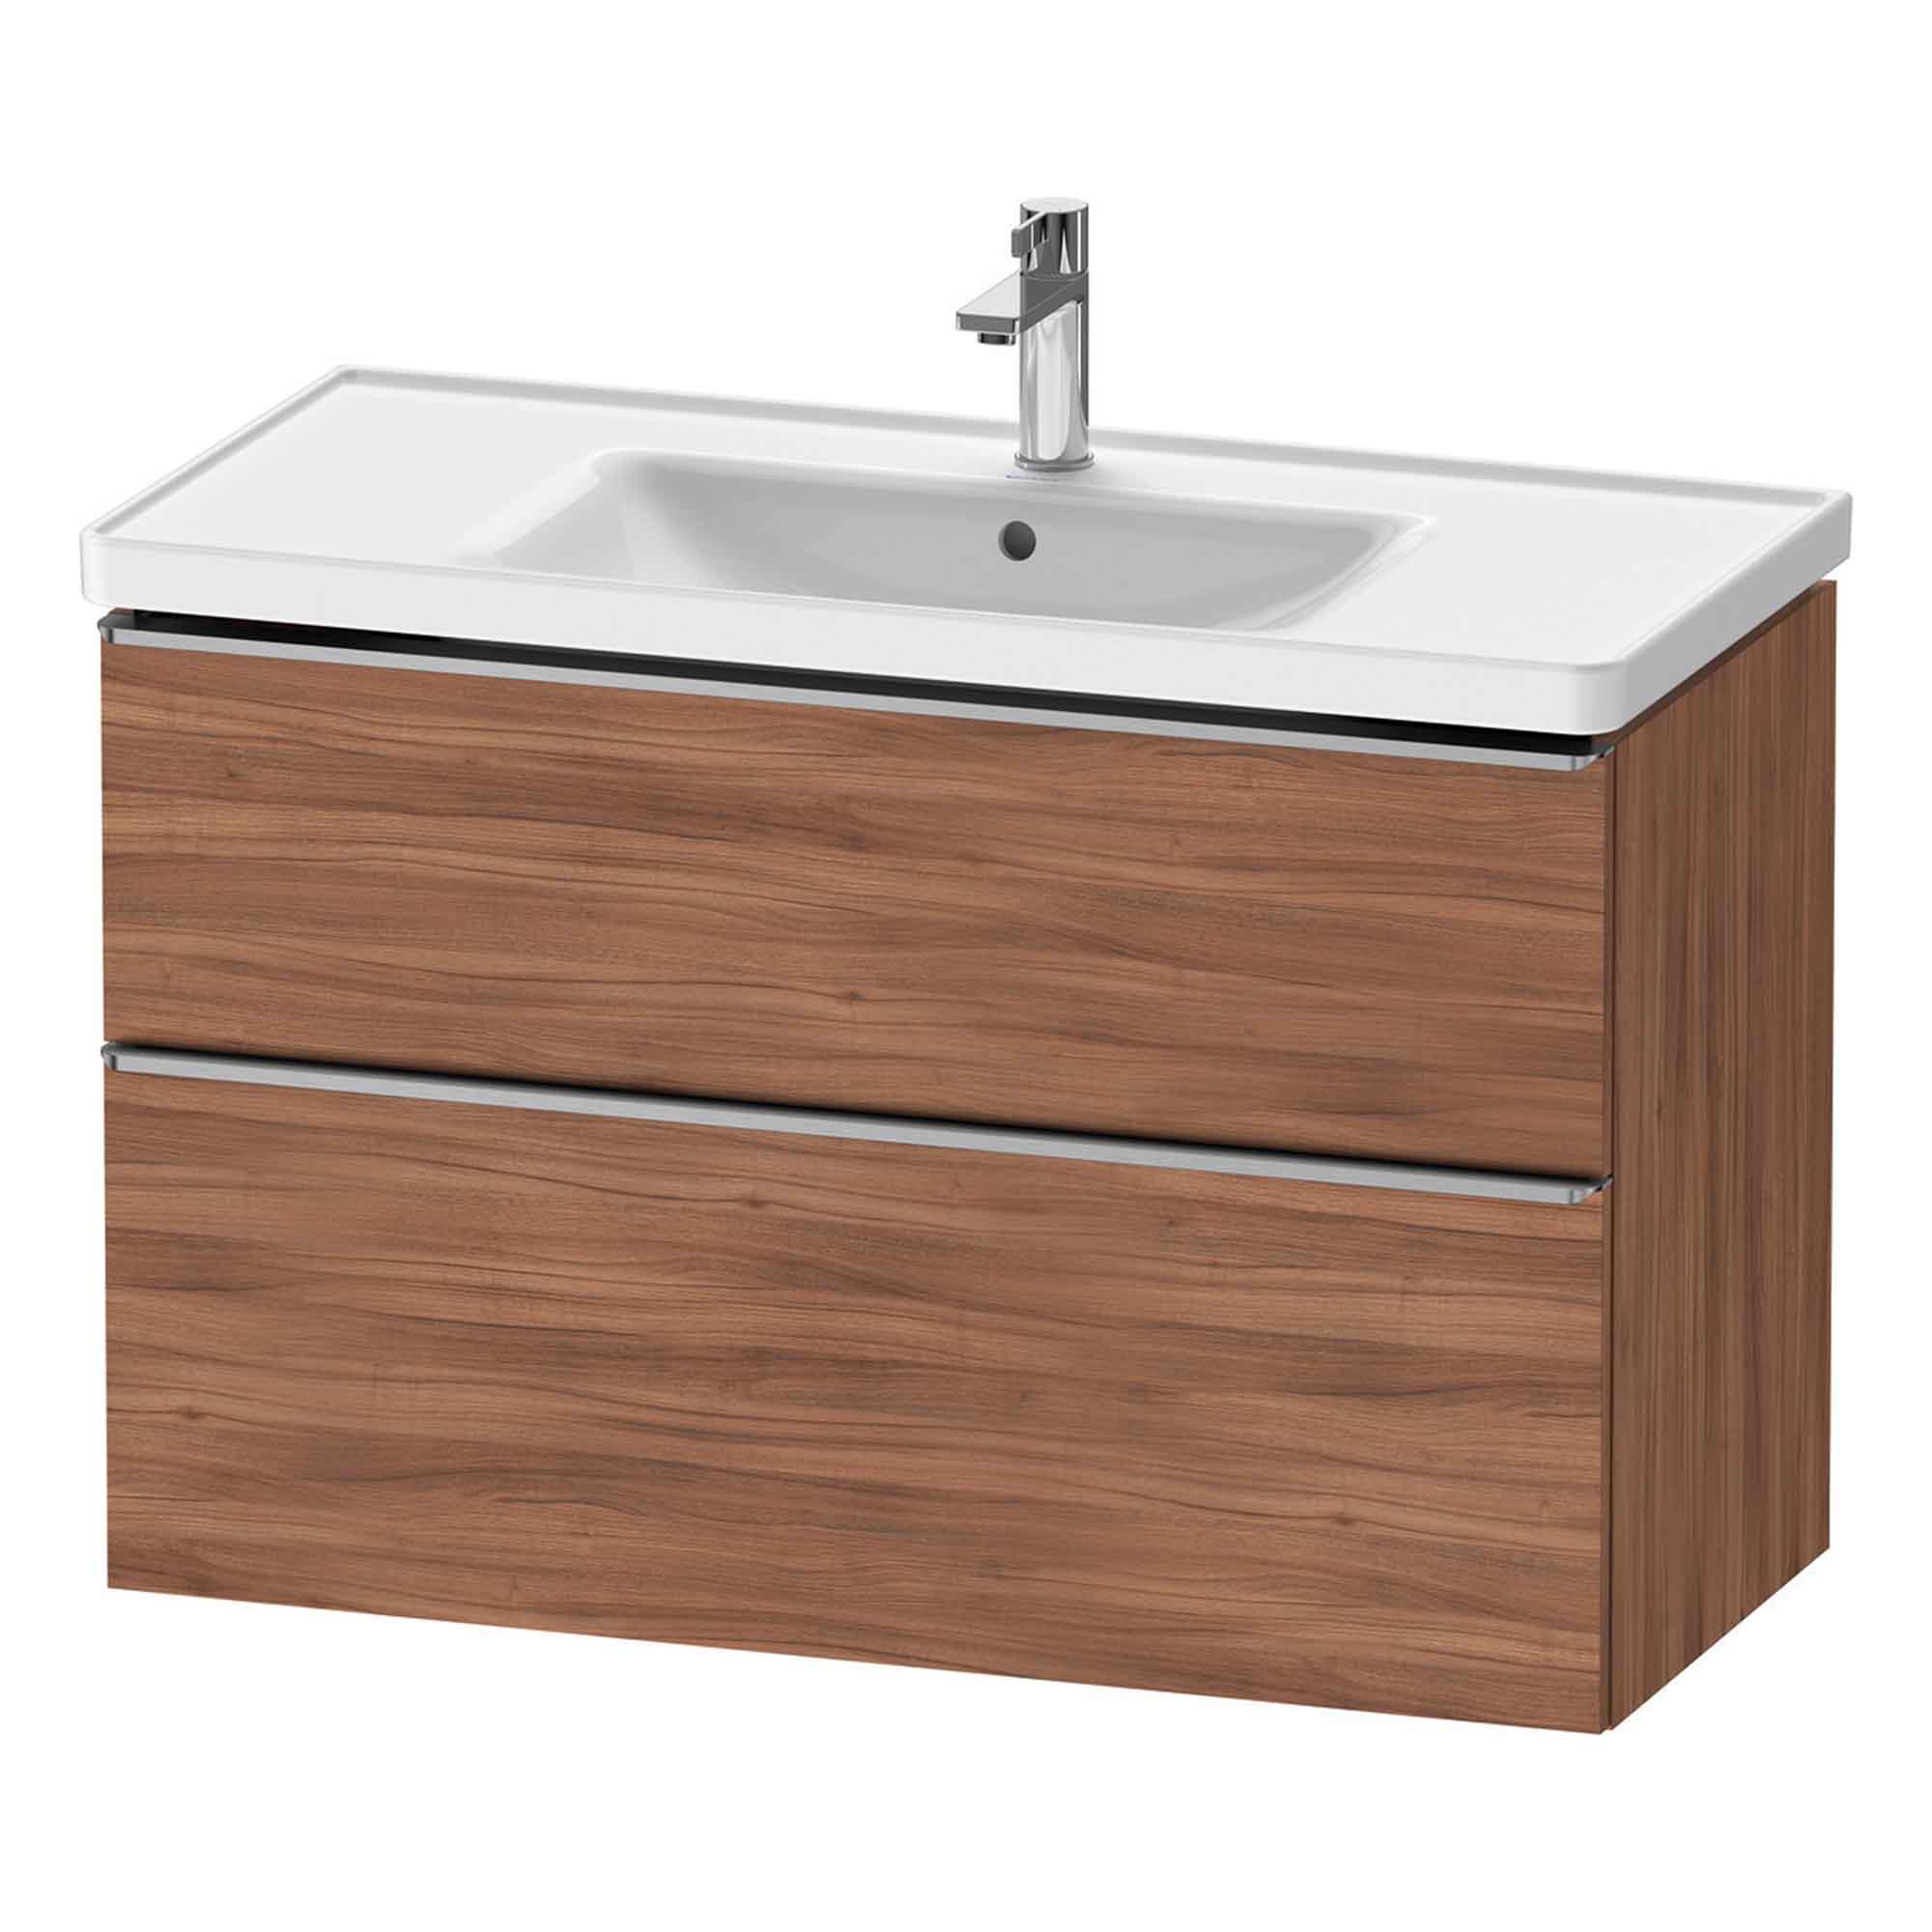 duravit d-neo 1000mm wall mounted vanity unit with d-neo basin walnut stainless steel handles